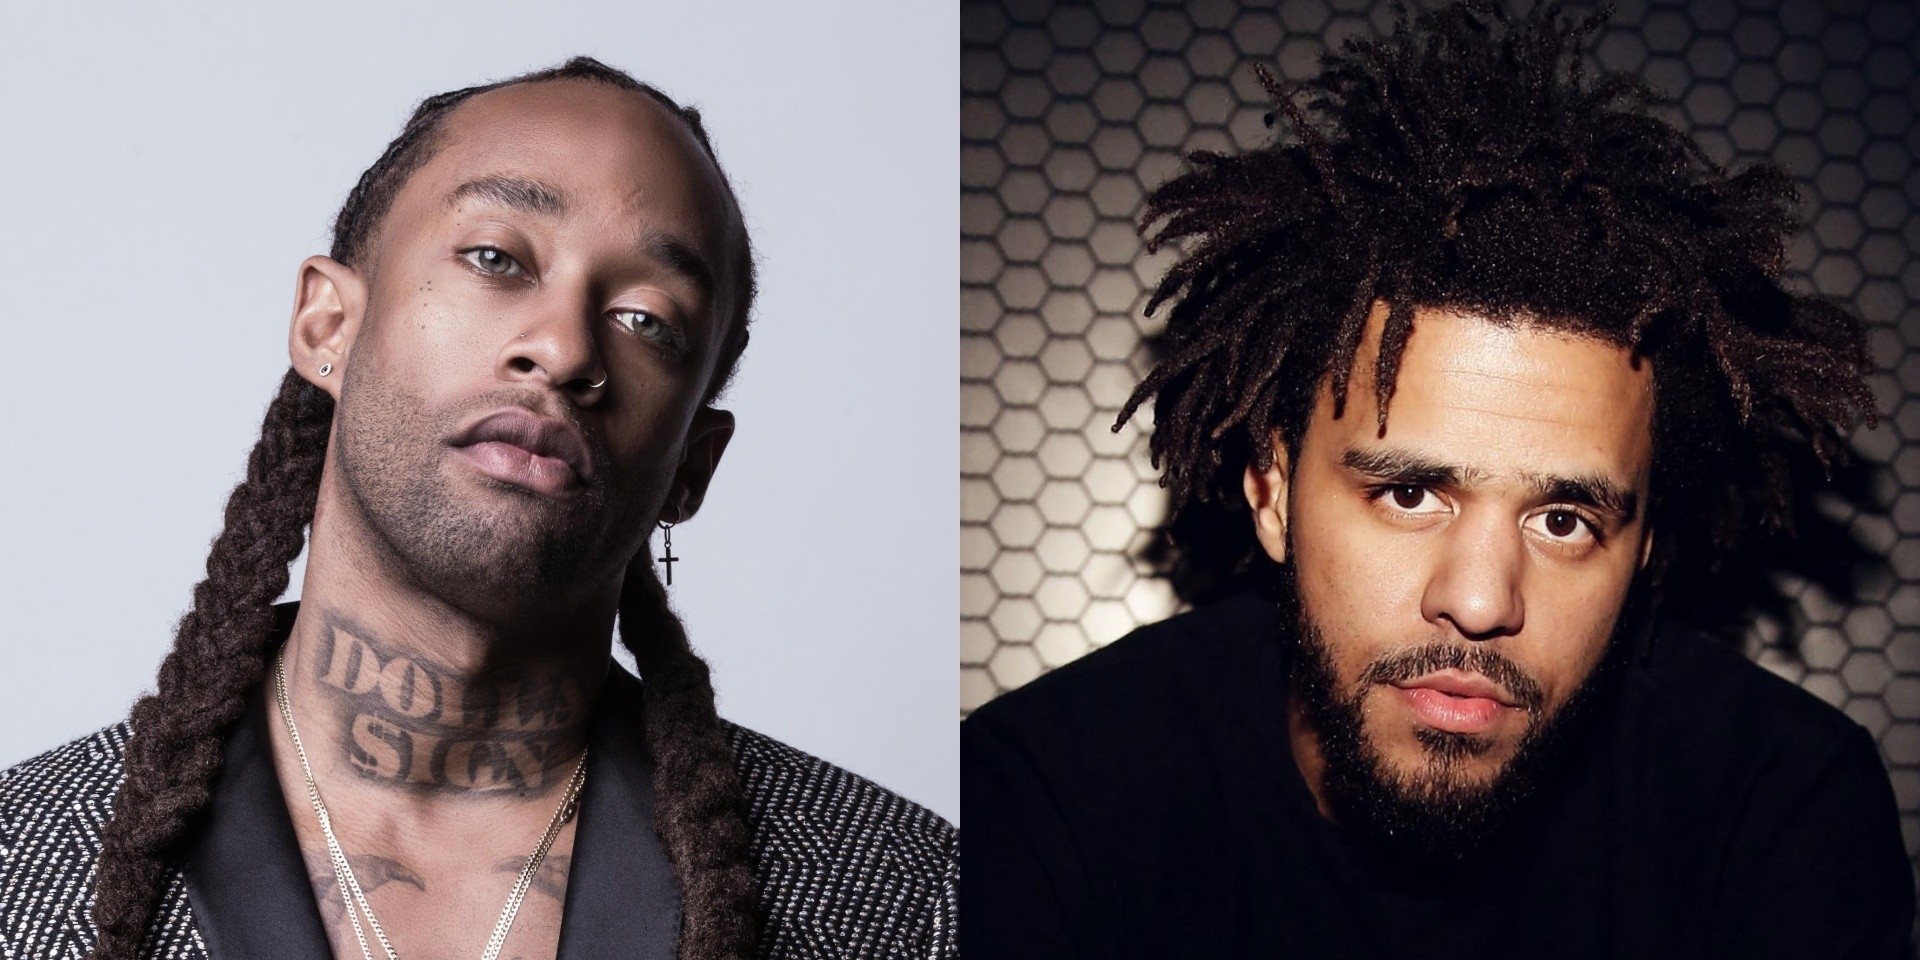 Ty Dolla $ign releases new song, ‘Purple Emoji’, featuring J. Cole – listen